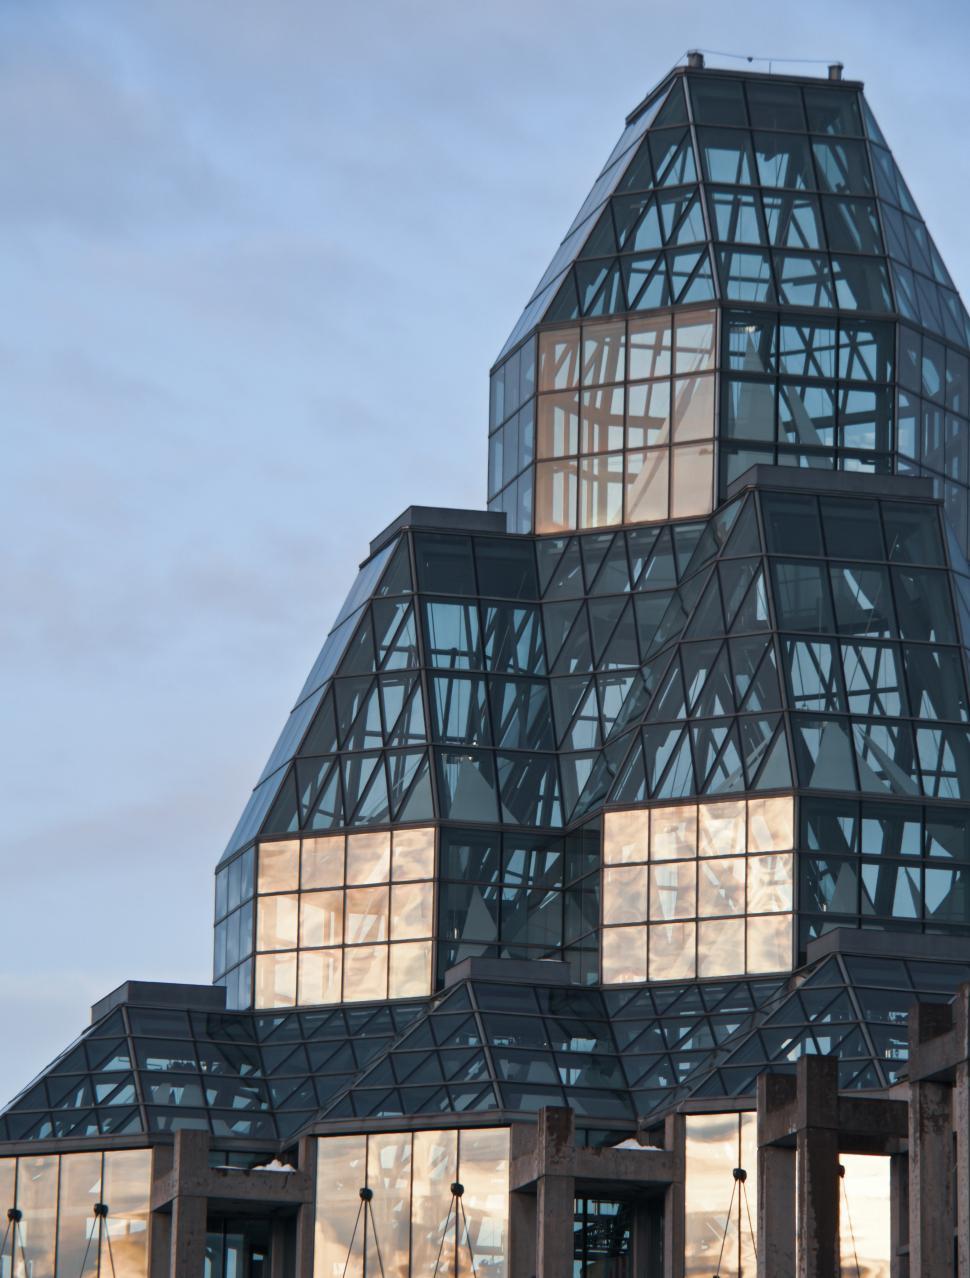 Free Image of A glass building with a triangular roof 